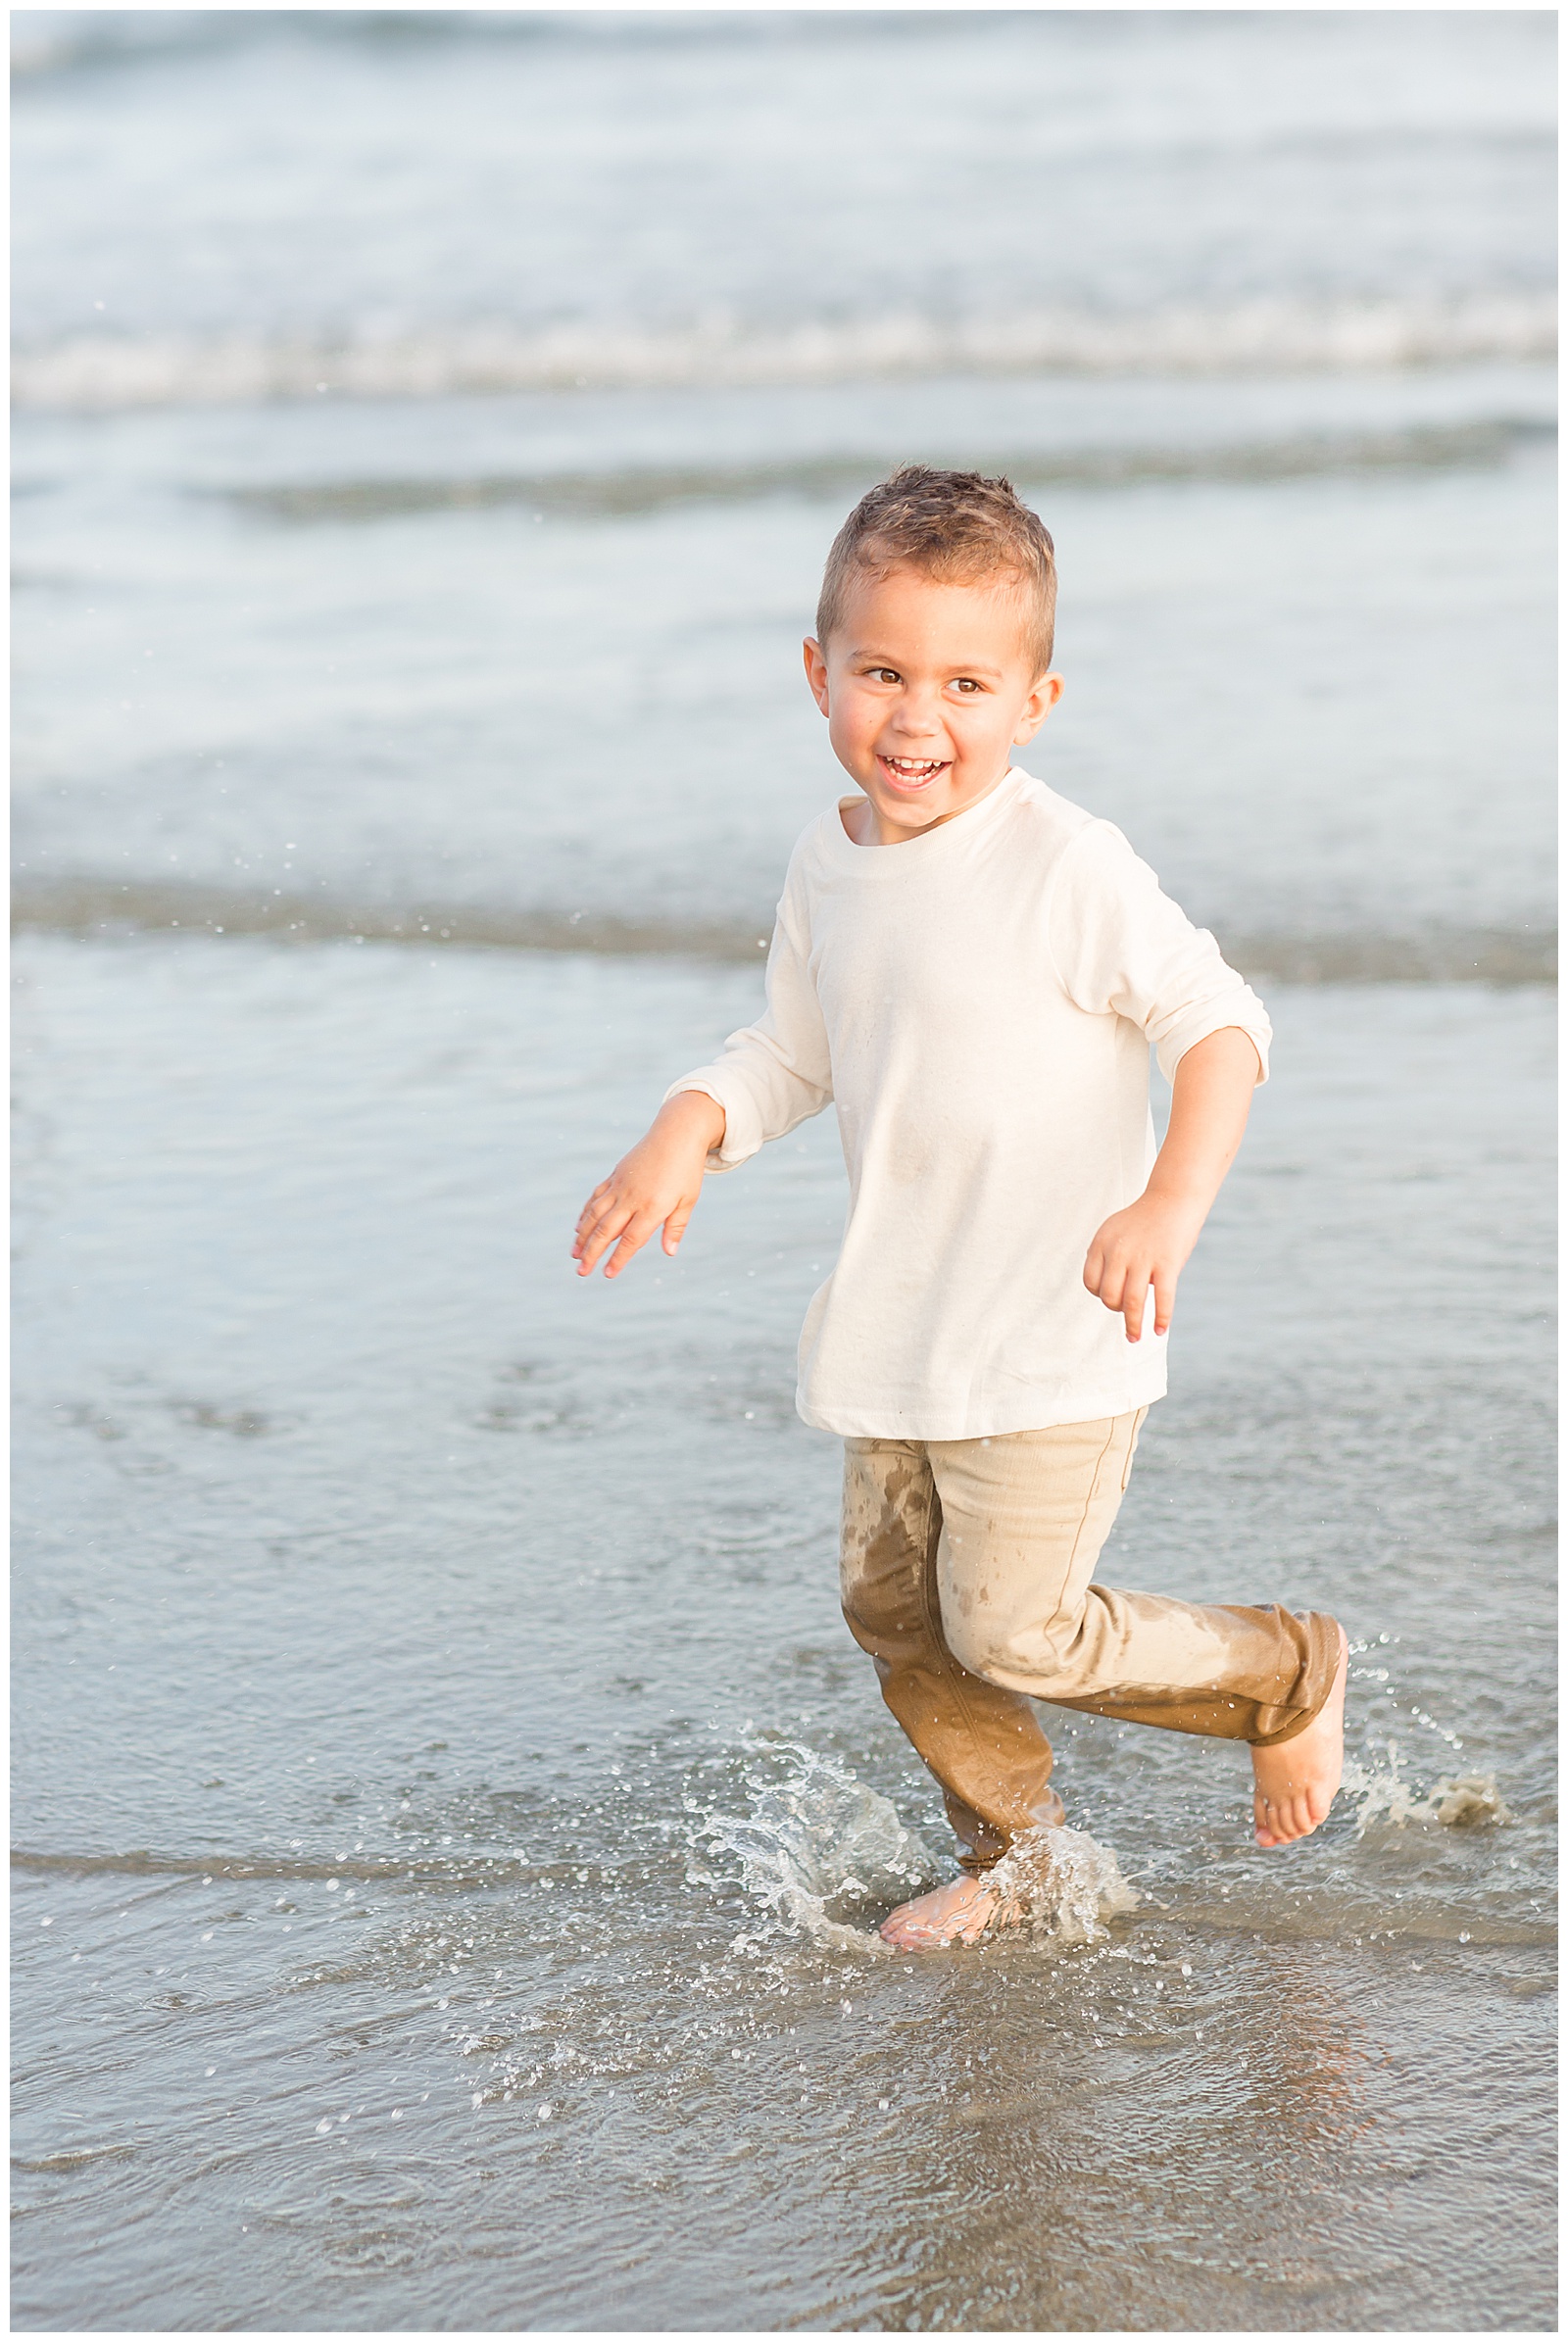 Little boy shares joyful moment as he runs in the waters at the beach in Charleston, SC wearing khaki pants and a cream long sleeve shirt during his family photography session with Rebecca Rice Photography.